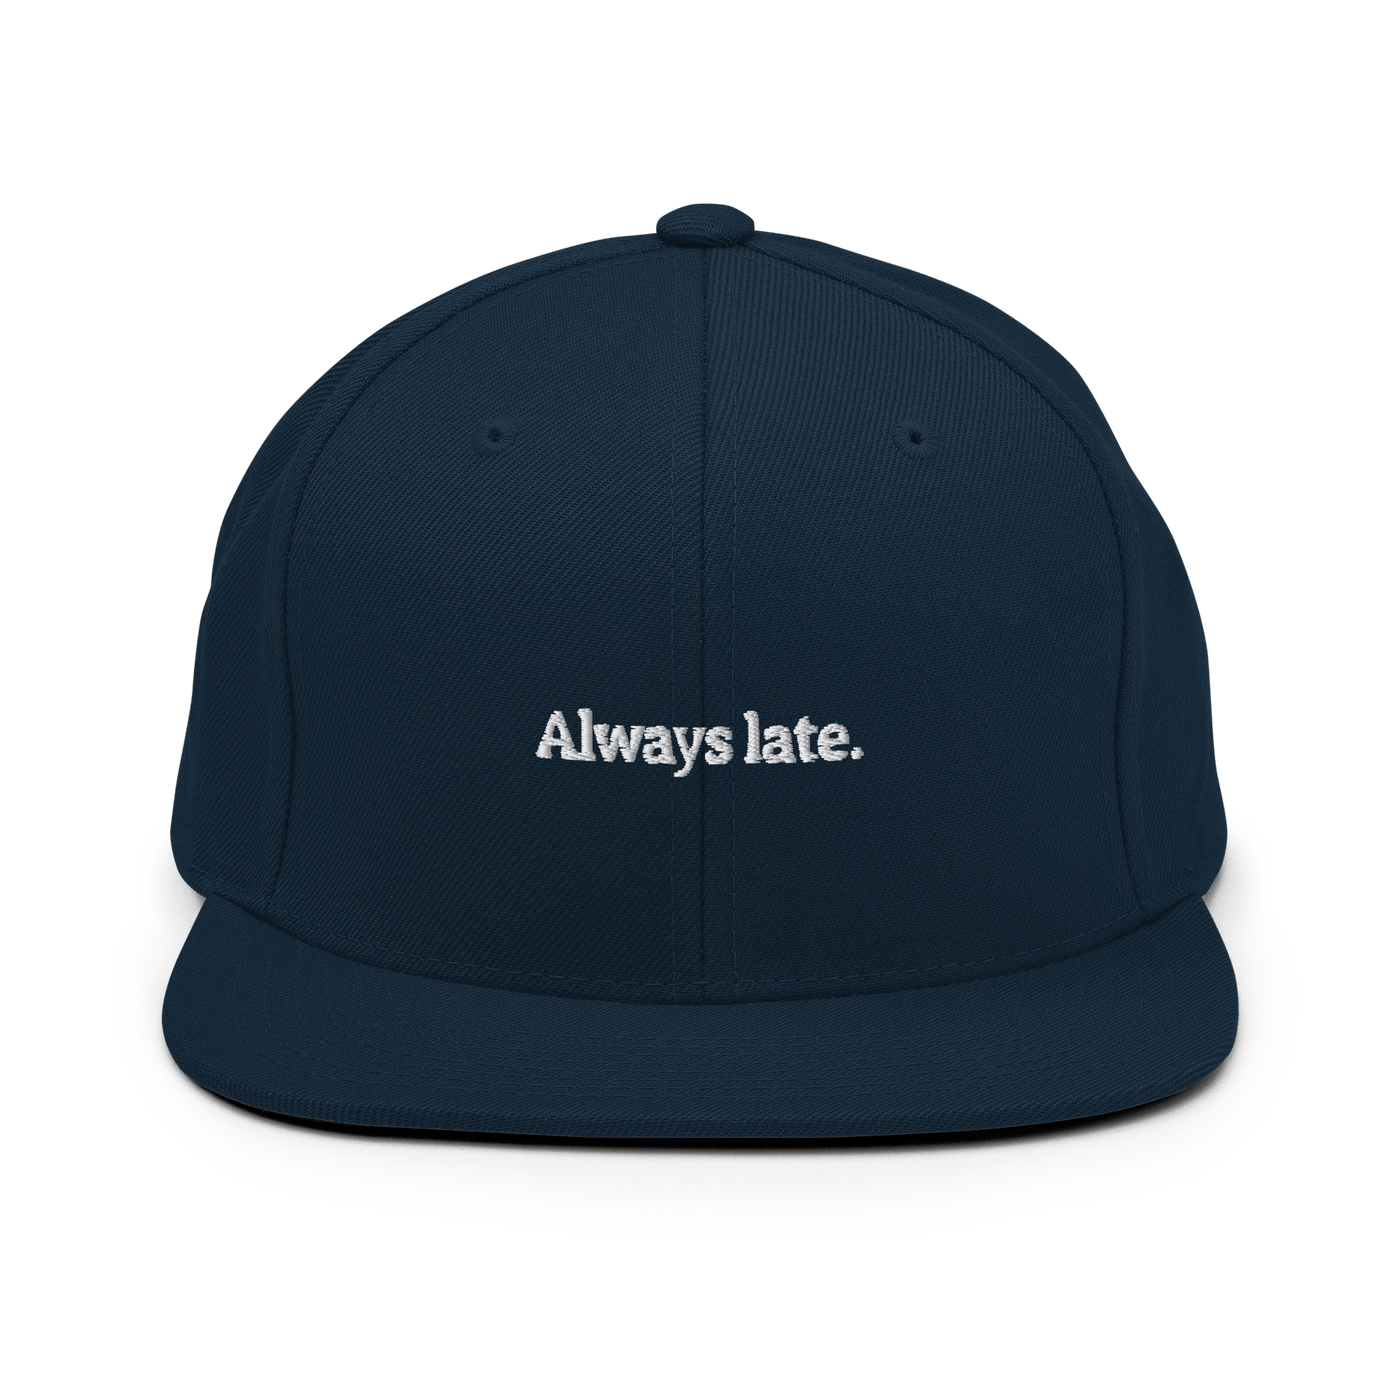 Always Late. Snapback Hat - Dark Navy - - Just Another Cap Store